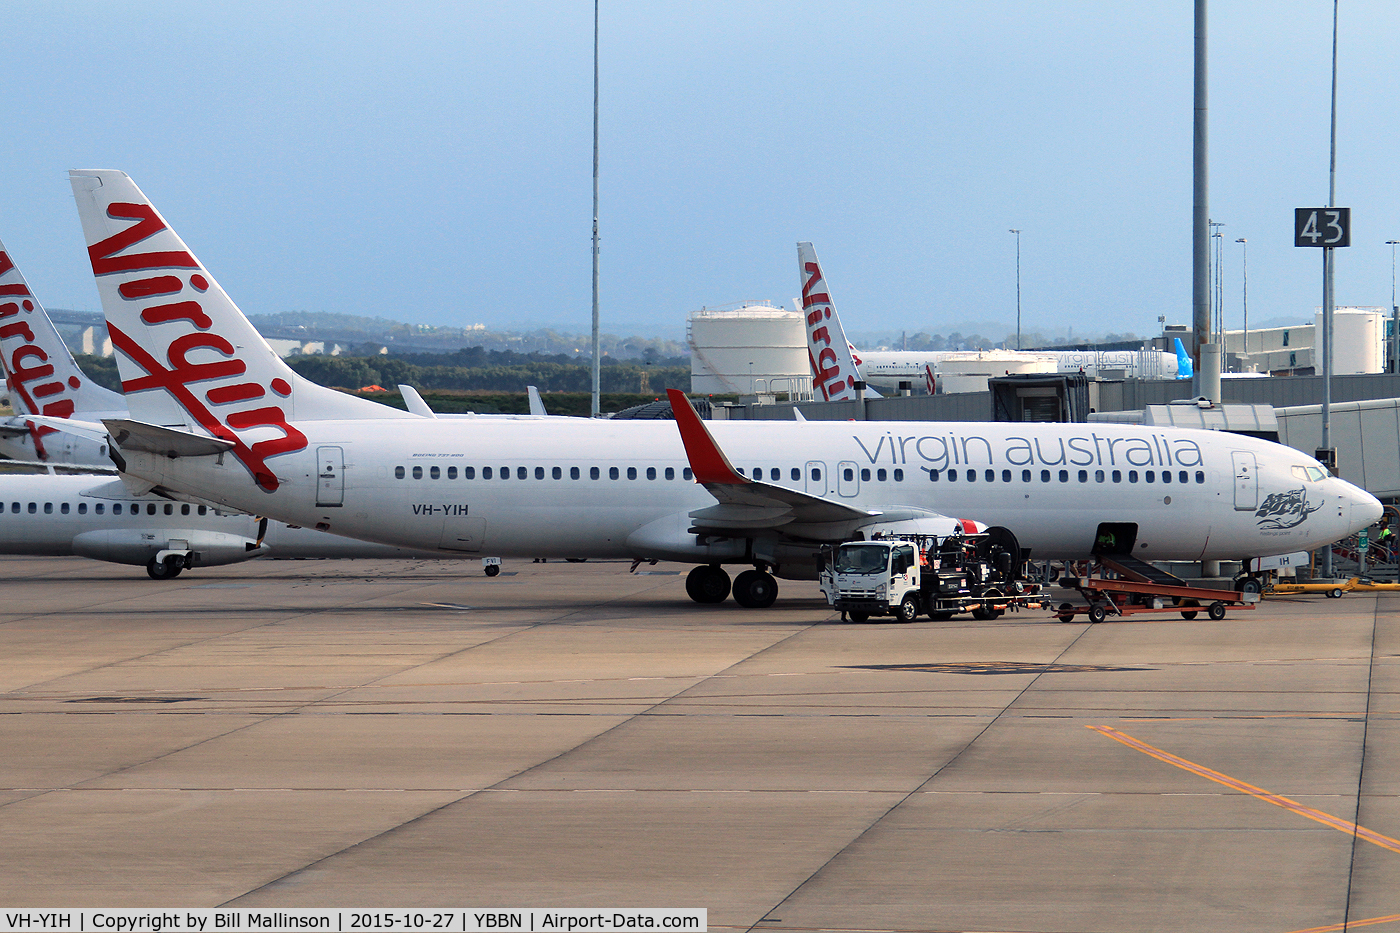 VH-YIH, 2012 Boeing 737-8FE C/N 38712, being readied for next trip